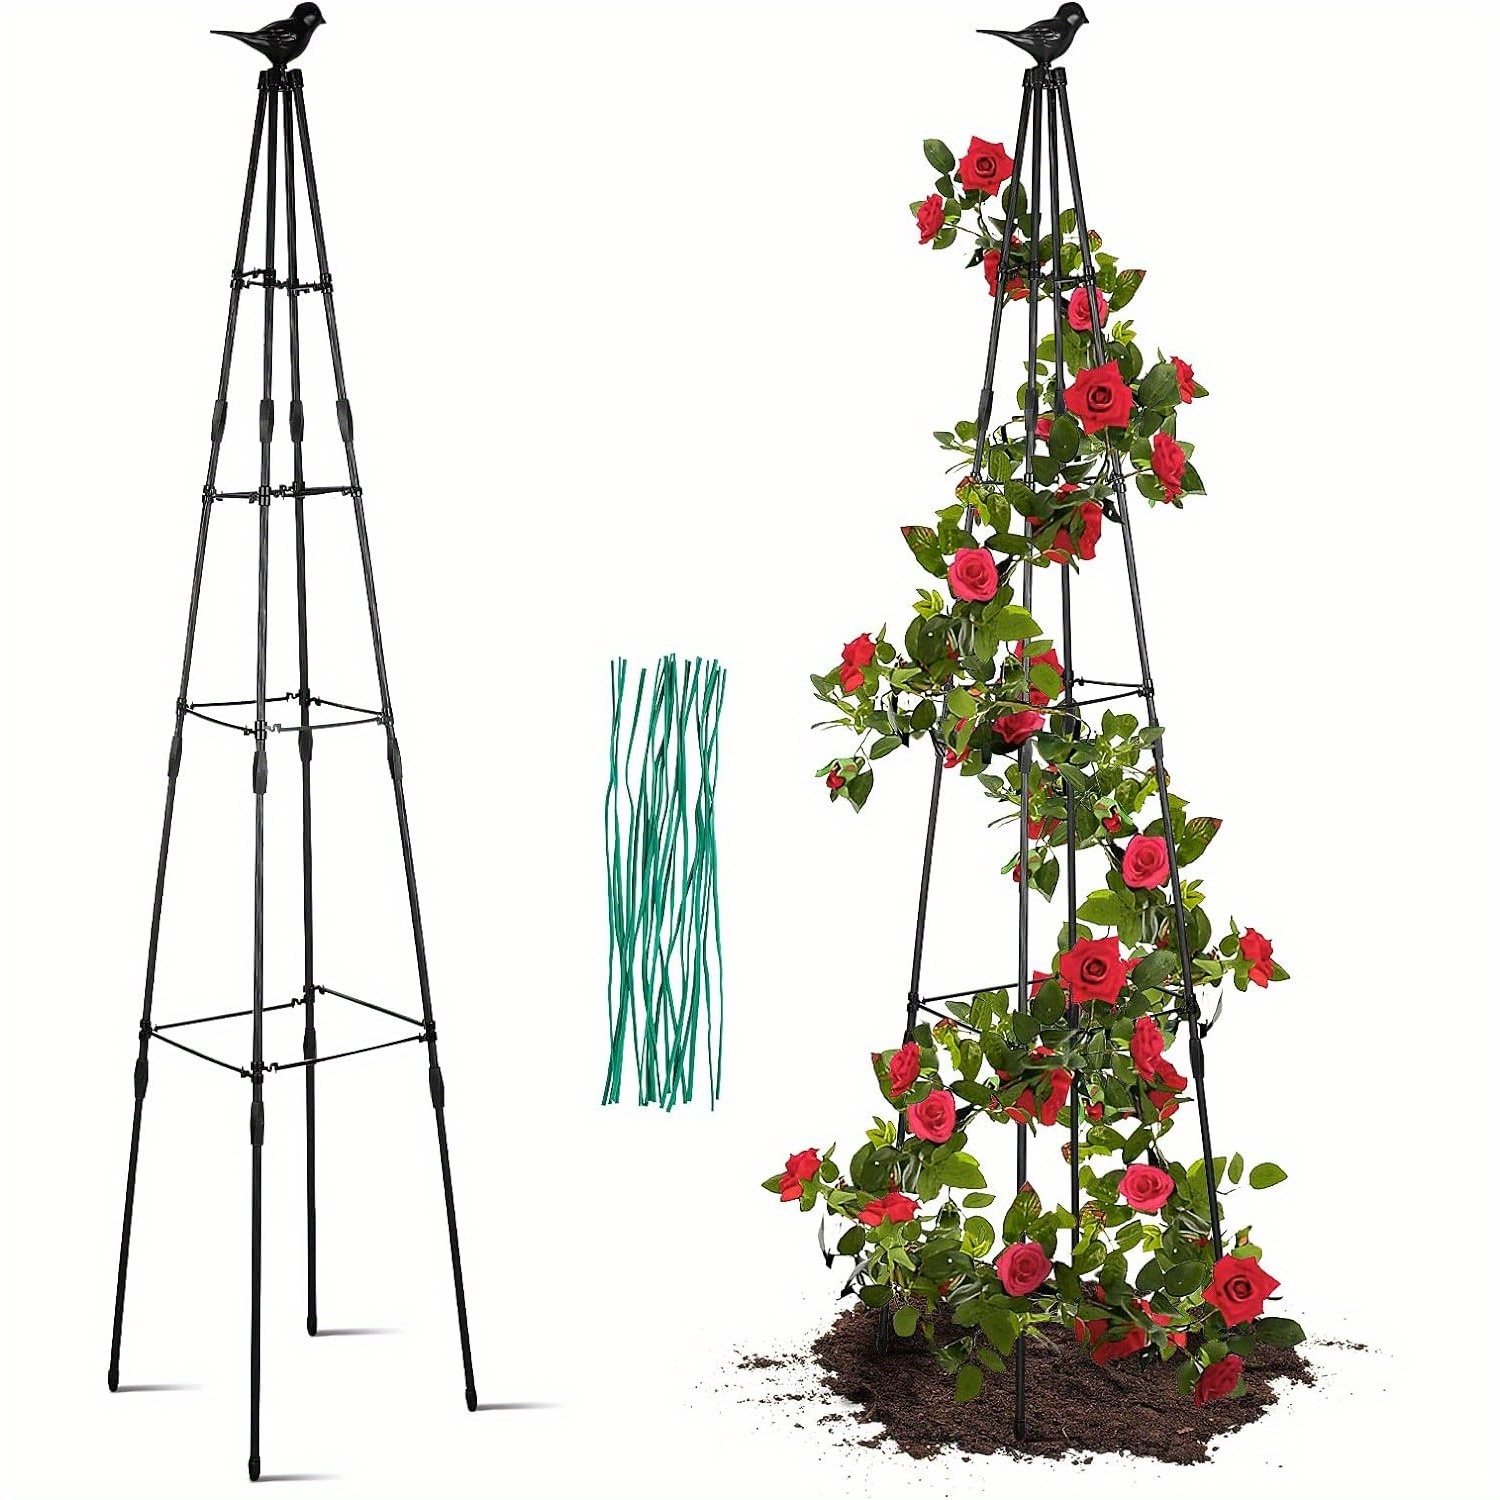 

63 Inches Garden Obelisk Trellis For Climbing Plants Outdoor, Plant Trellis For Potted Plants Indoor, 4-tier Plant Support With 20 Pcs Cable Ties, Vines & Flowers, Tomato Cage Tower, Black